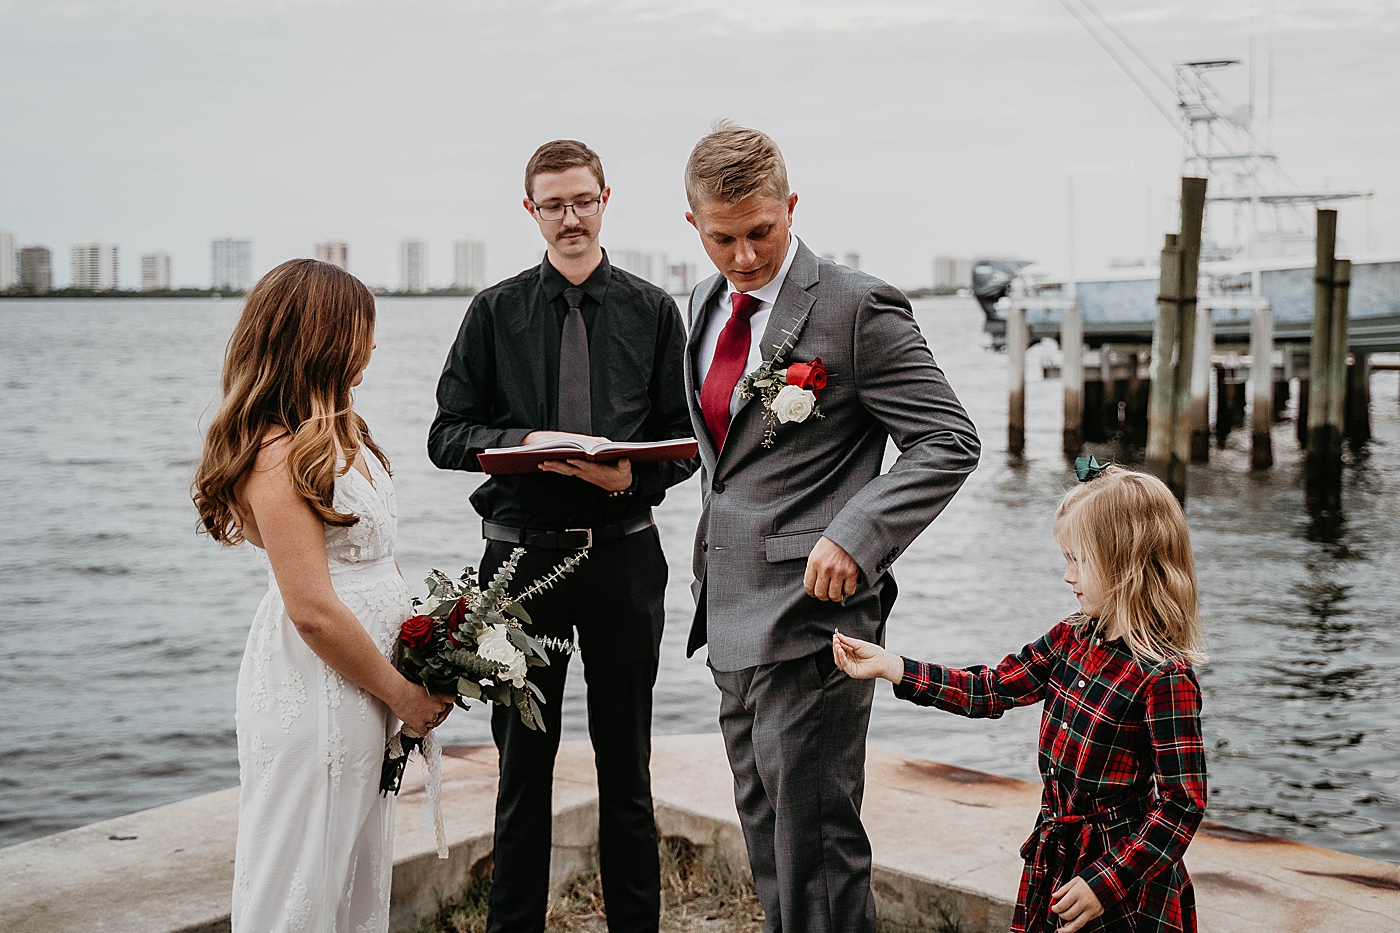 Little girl giving wedding band to groom South Florida Elopement Photography captured by Krystal Capone Photography